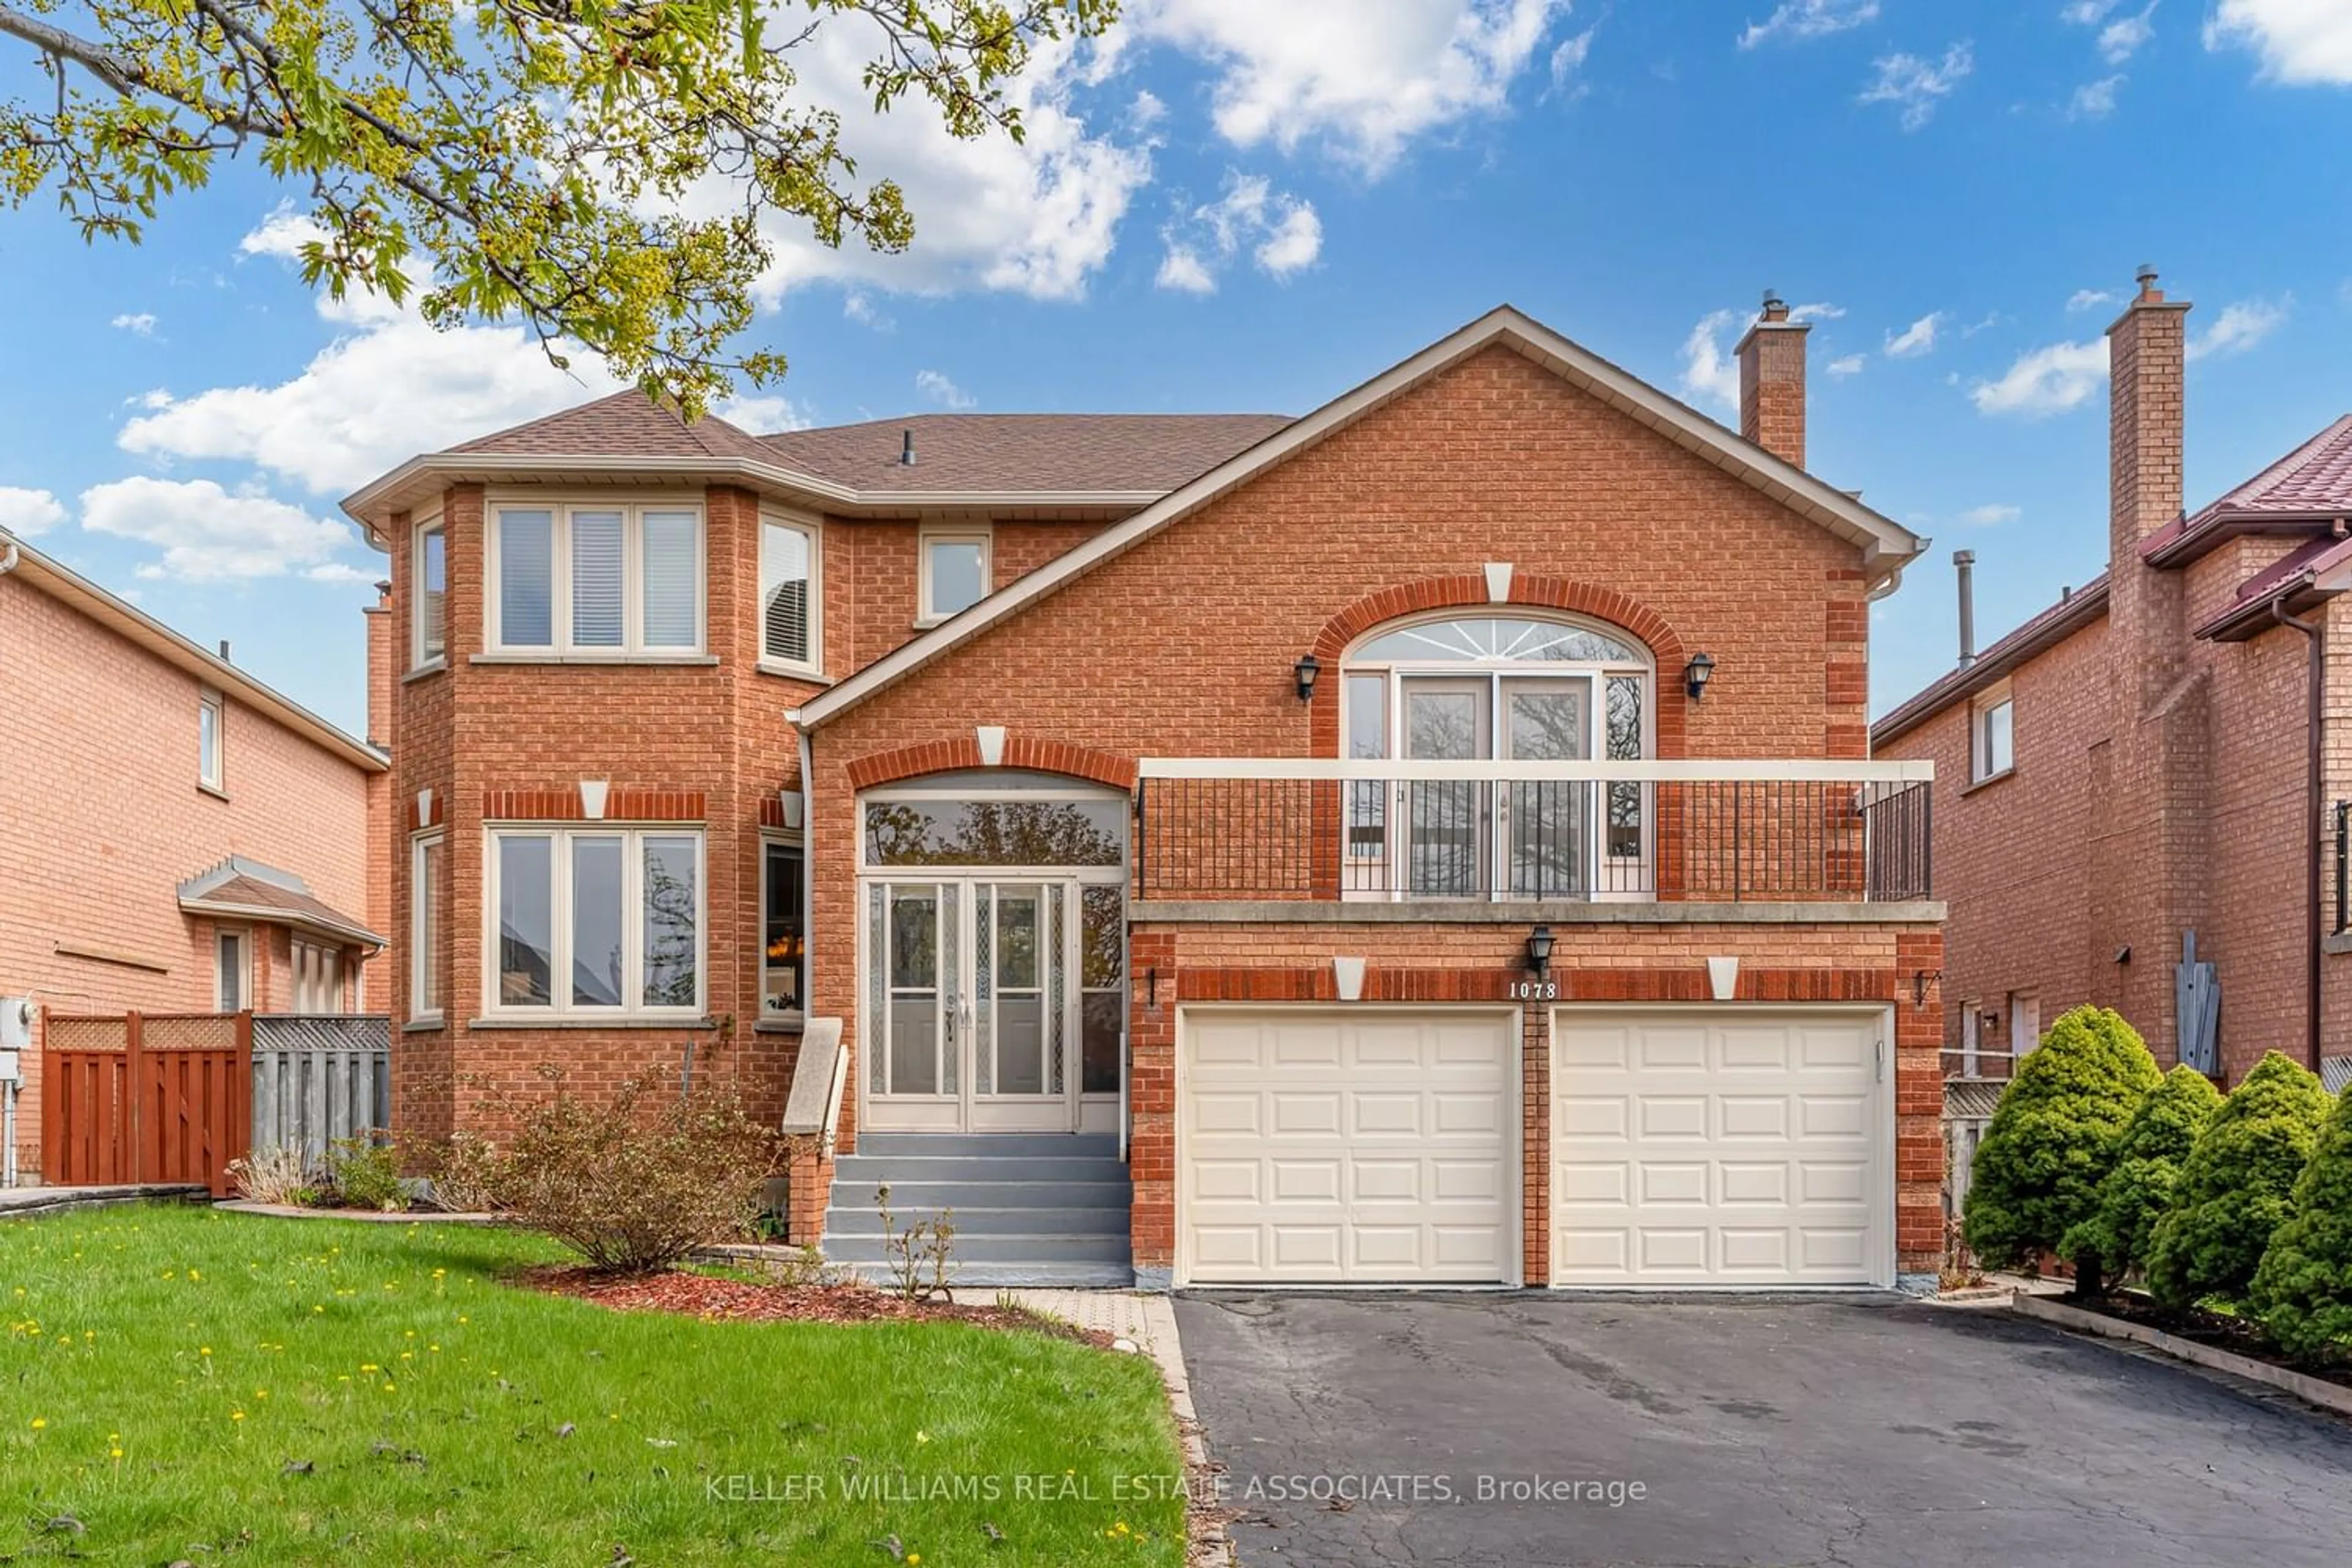 Home with brick exterior material for 1078 Bancroft Dr, Mississauga Ontario L5V 1B9